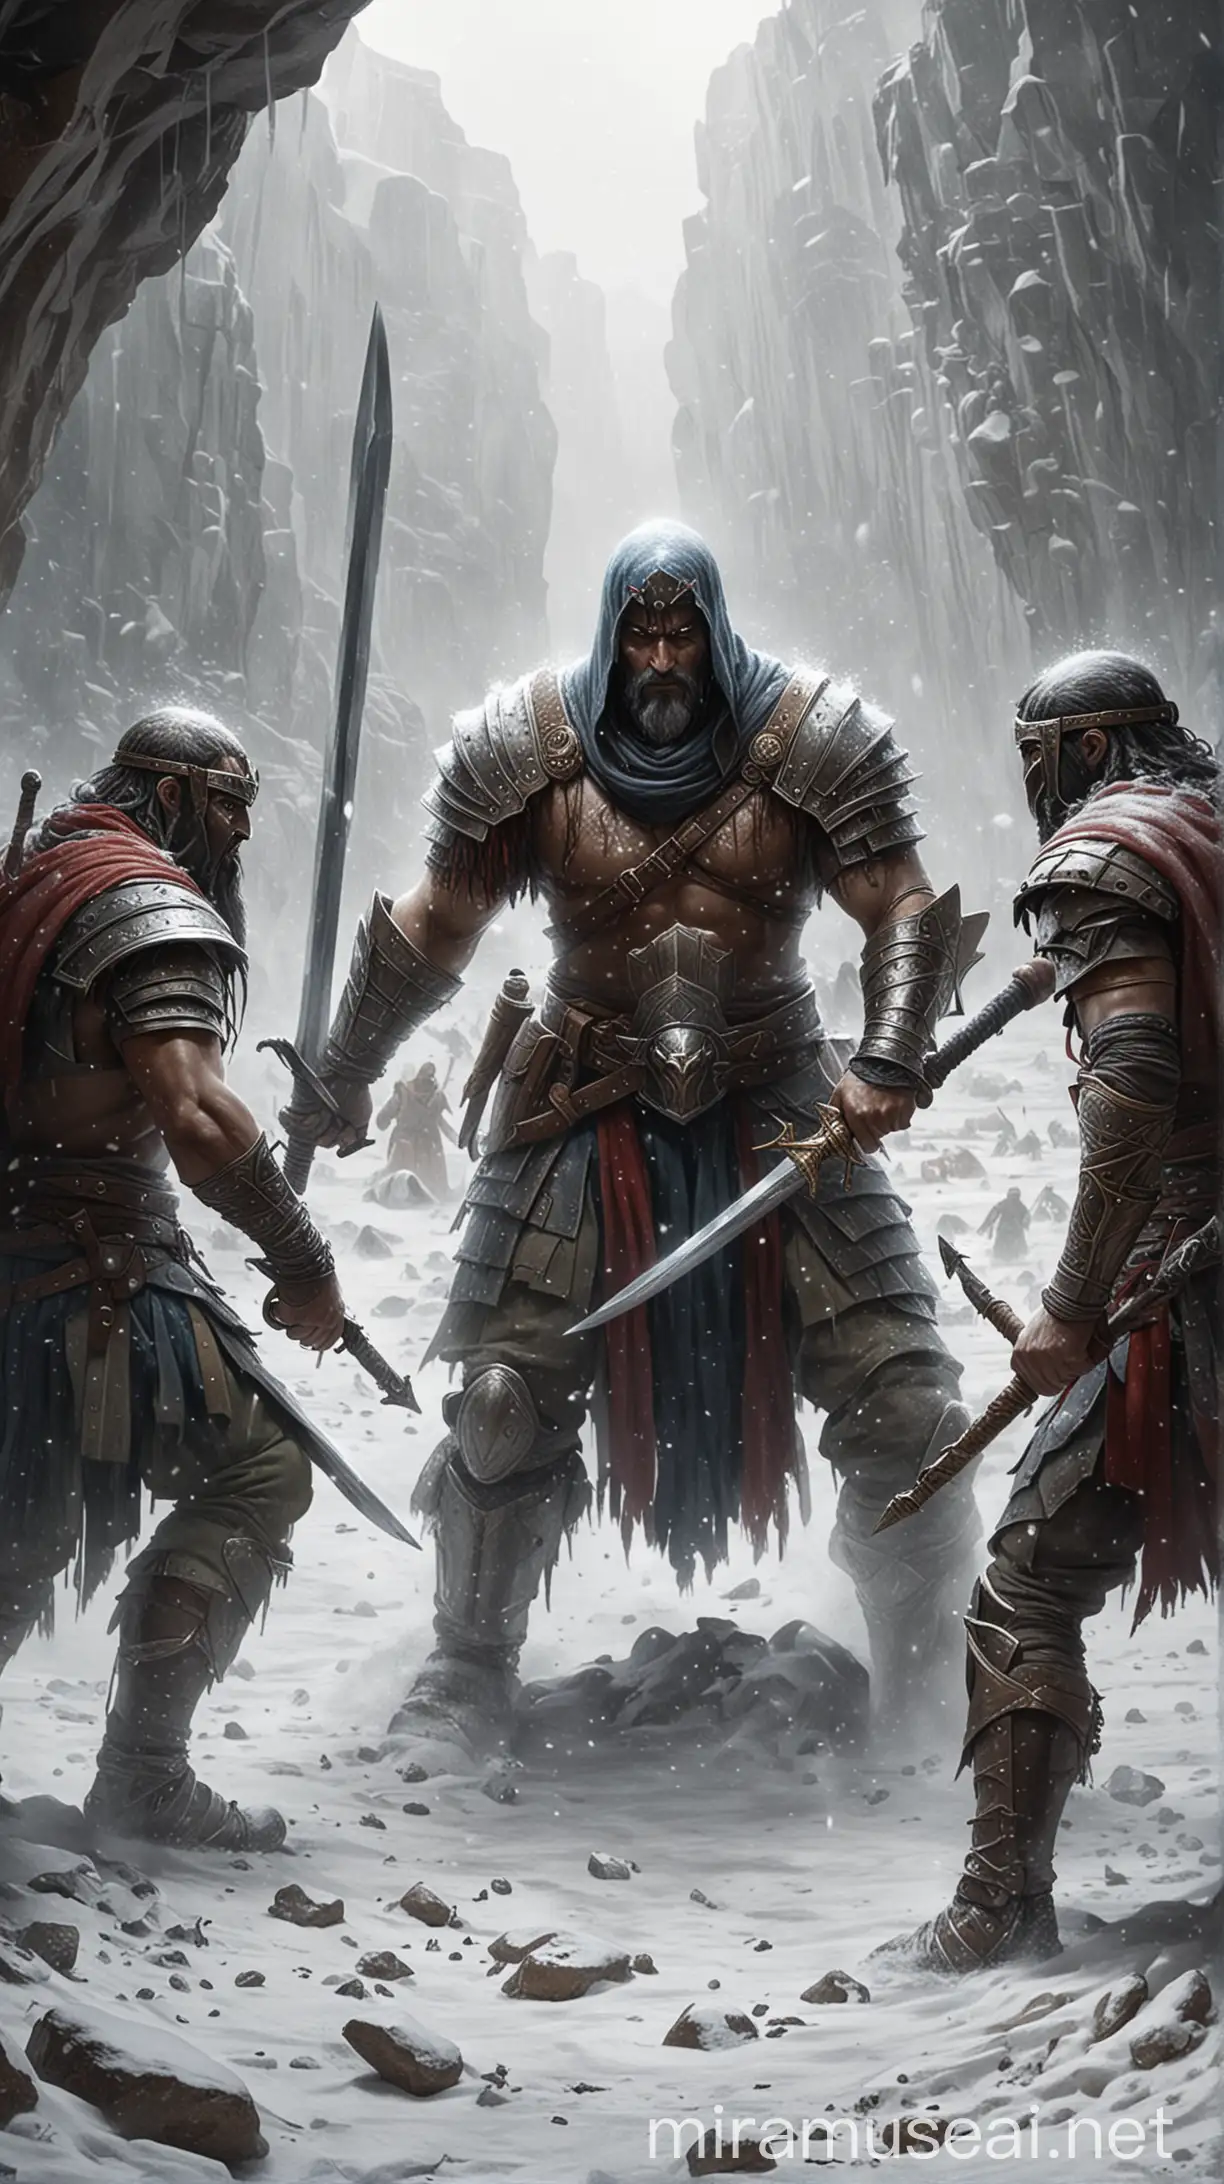 Prompt: Create an image depicting Benaiah facing two Moabite champions in combat within a snowy pit.